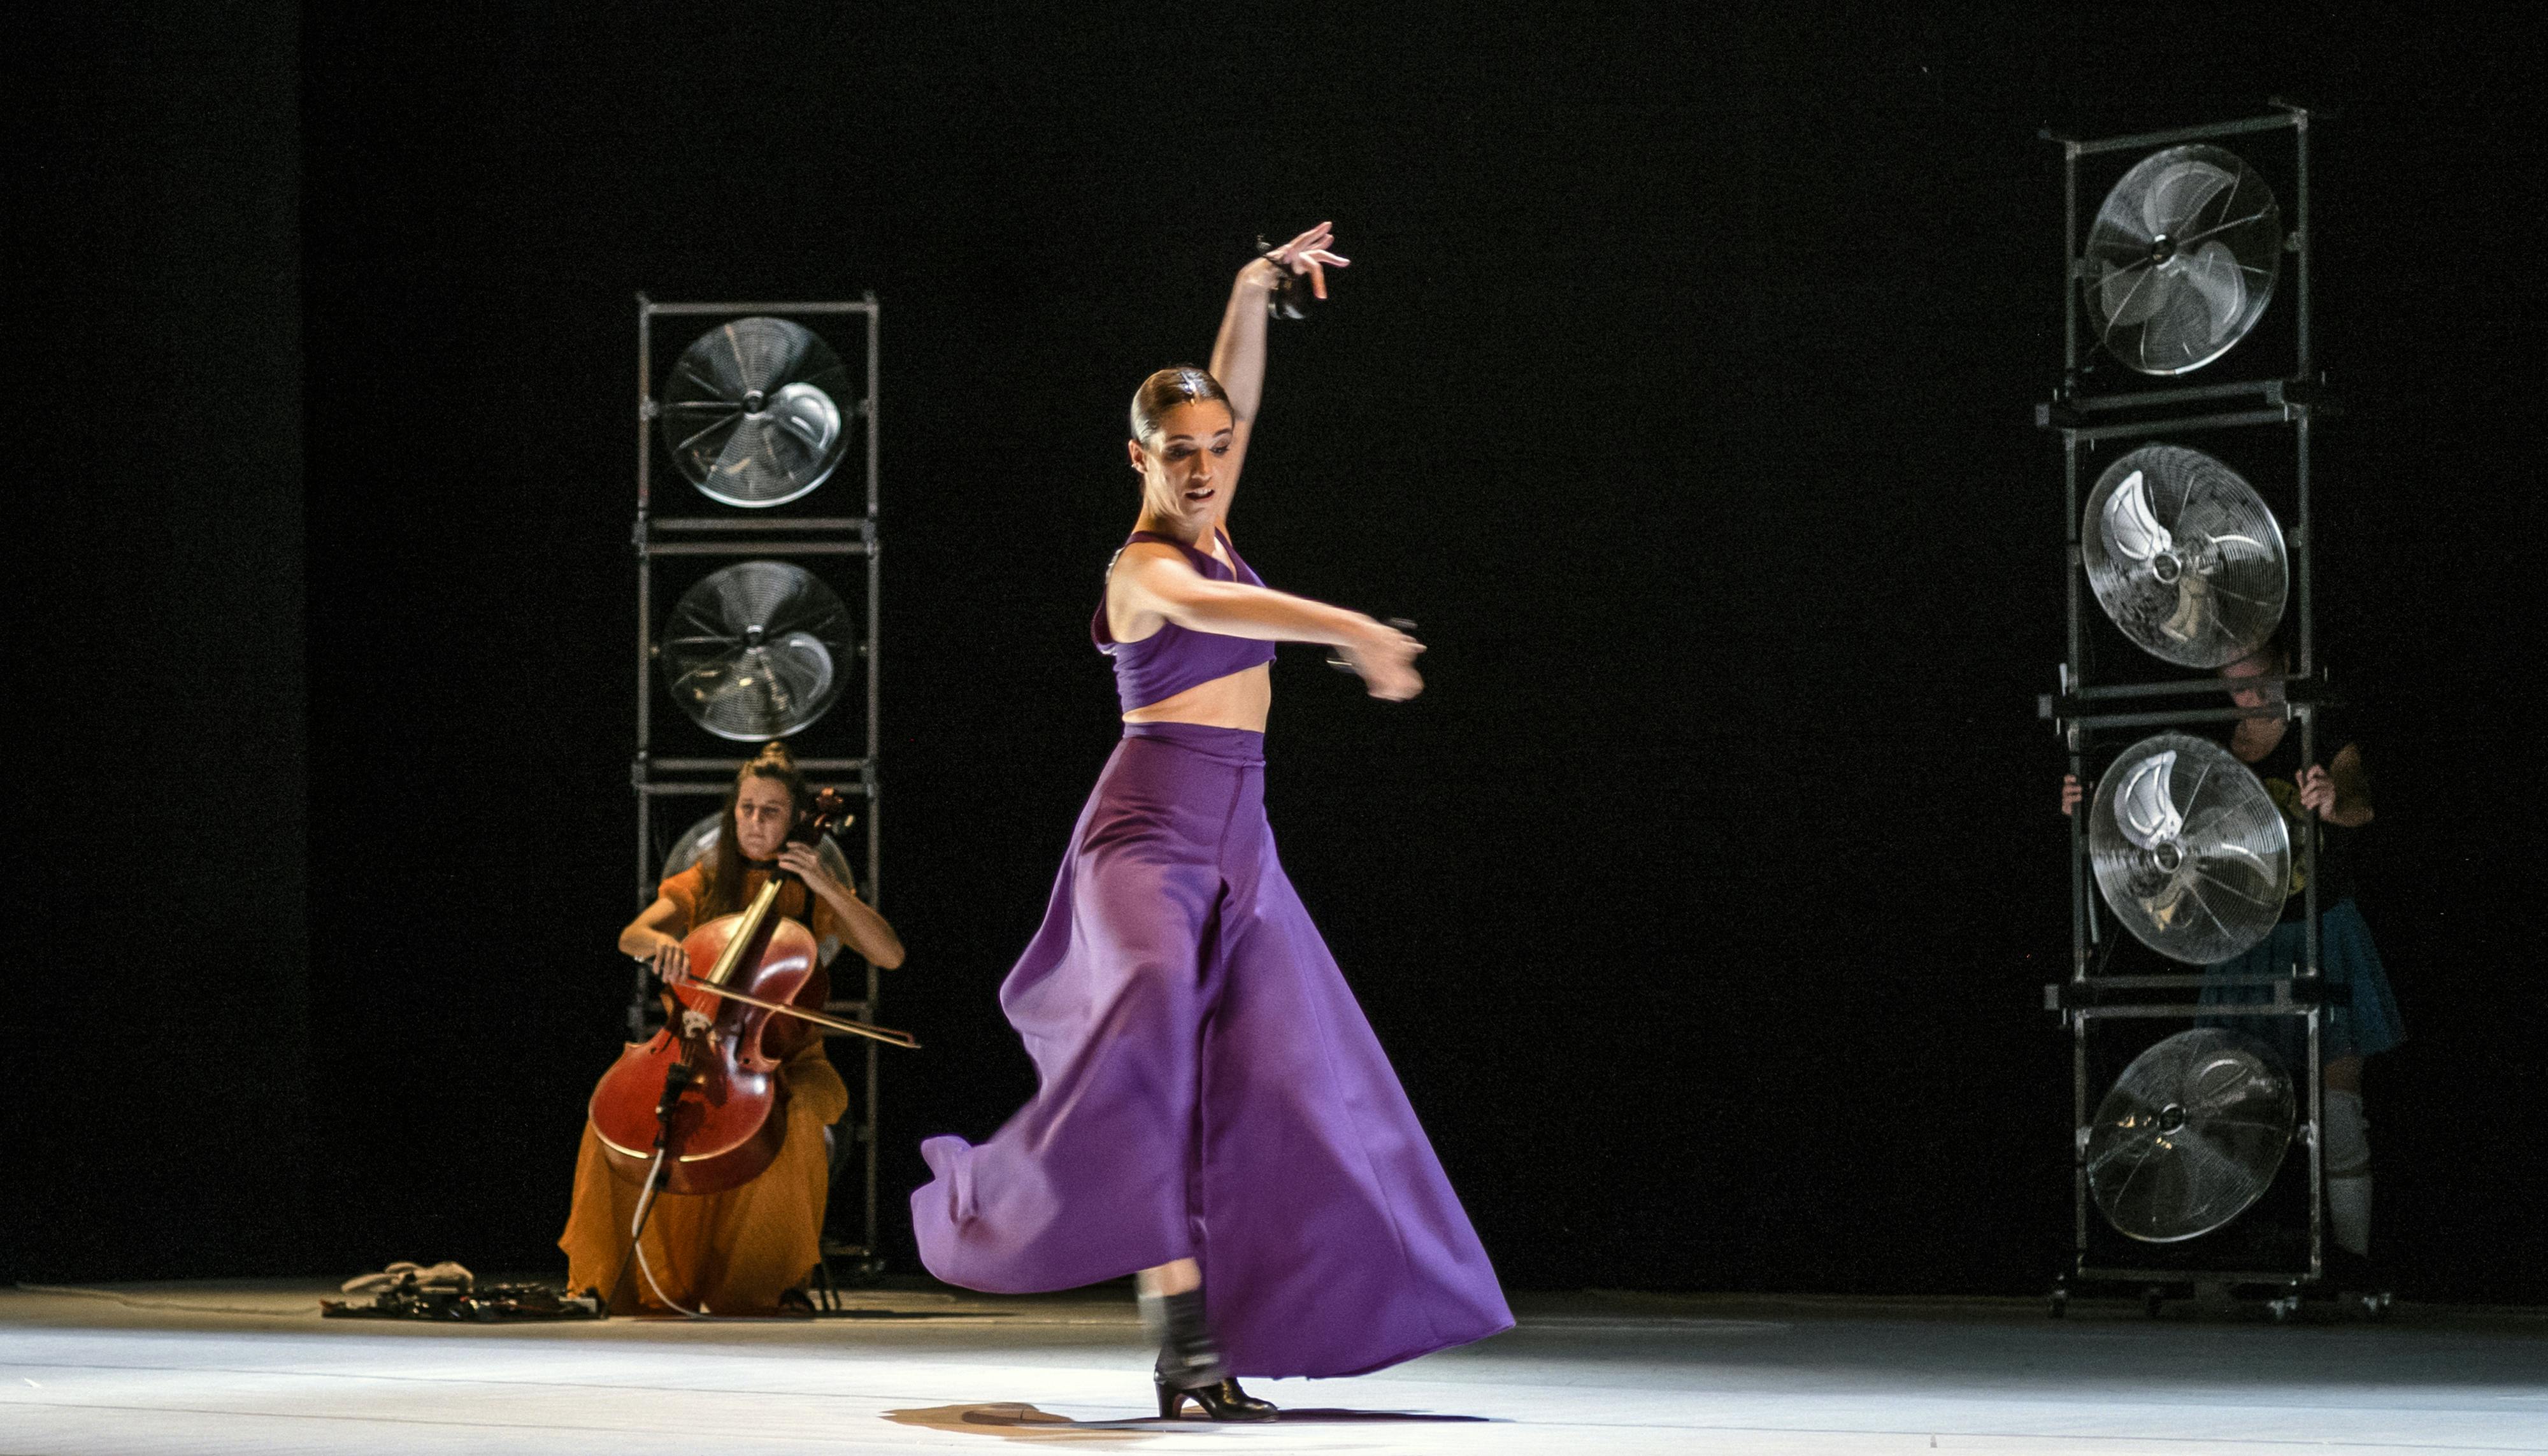 In the foreground a flamenco dancer in a long purple dress as she rotates while raising her arms. Behind is a cellist in an orange dress playing her instrument.